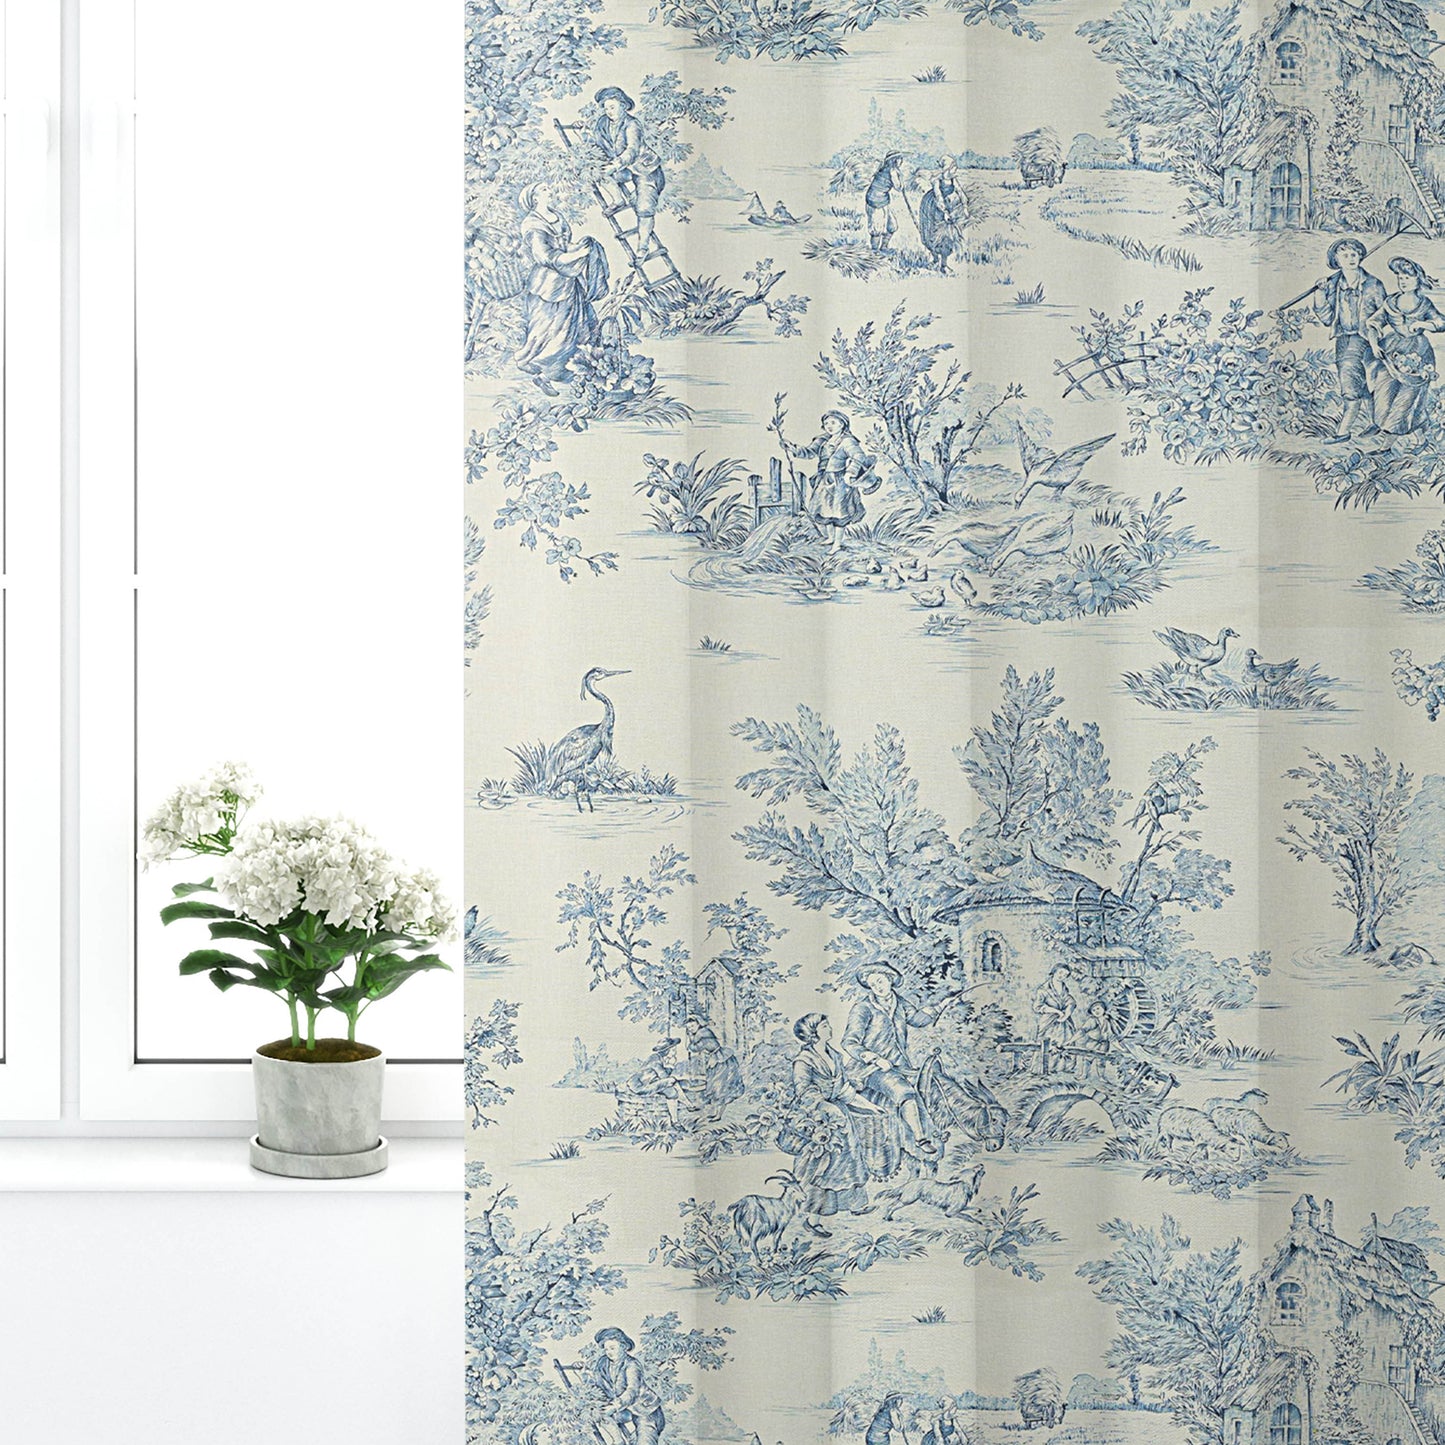 Pinch Pleated Curtain Panels Pair in Pastorale #2 Blue on Cream French Country Toile